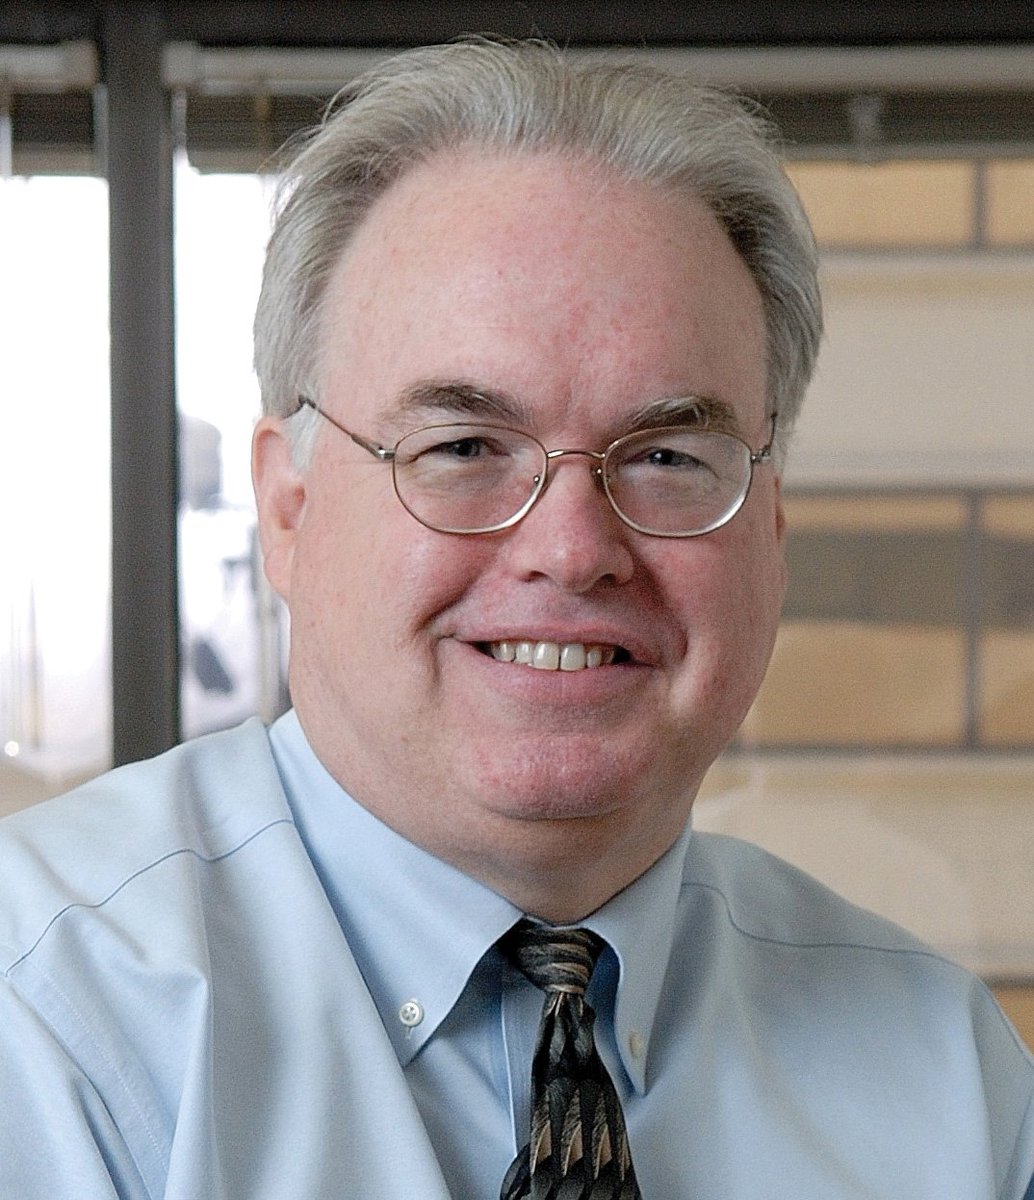 Portrait of Tim Delaney, smiling at the camera wearing glasses and a light blue shirt with a patterned tie.